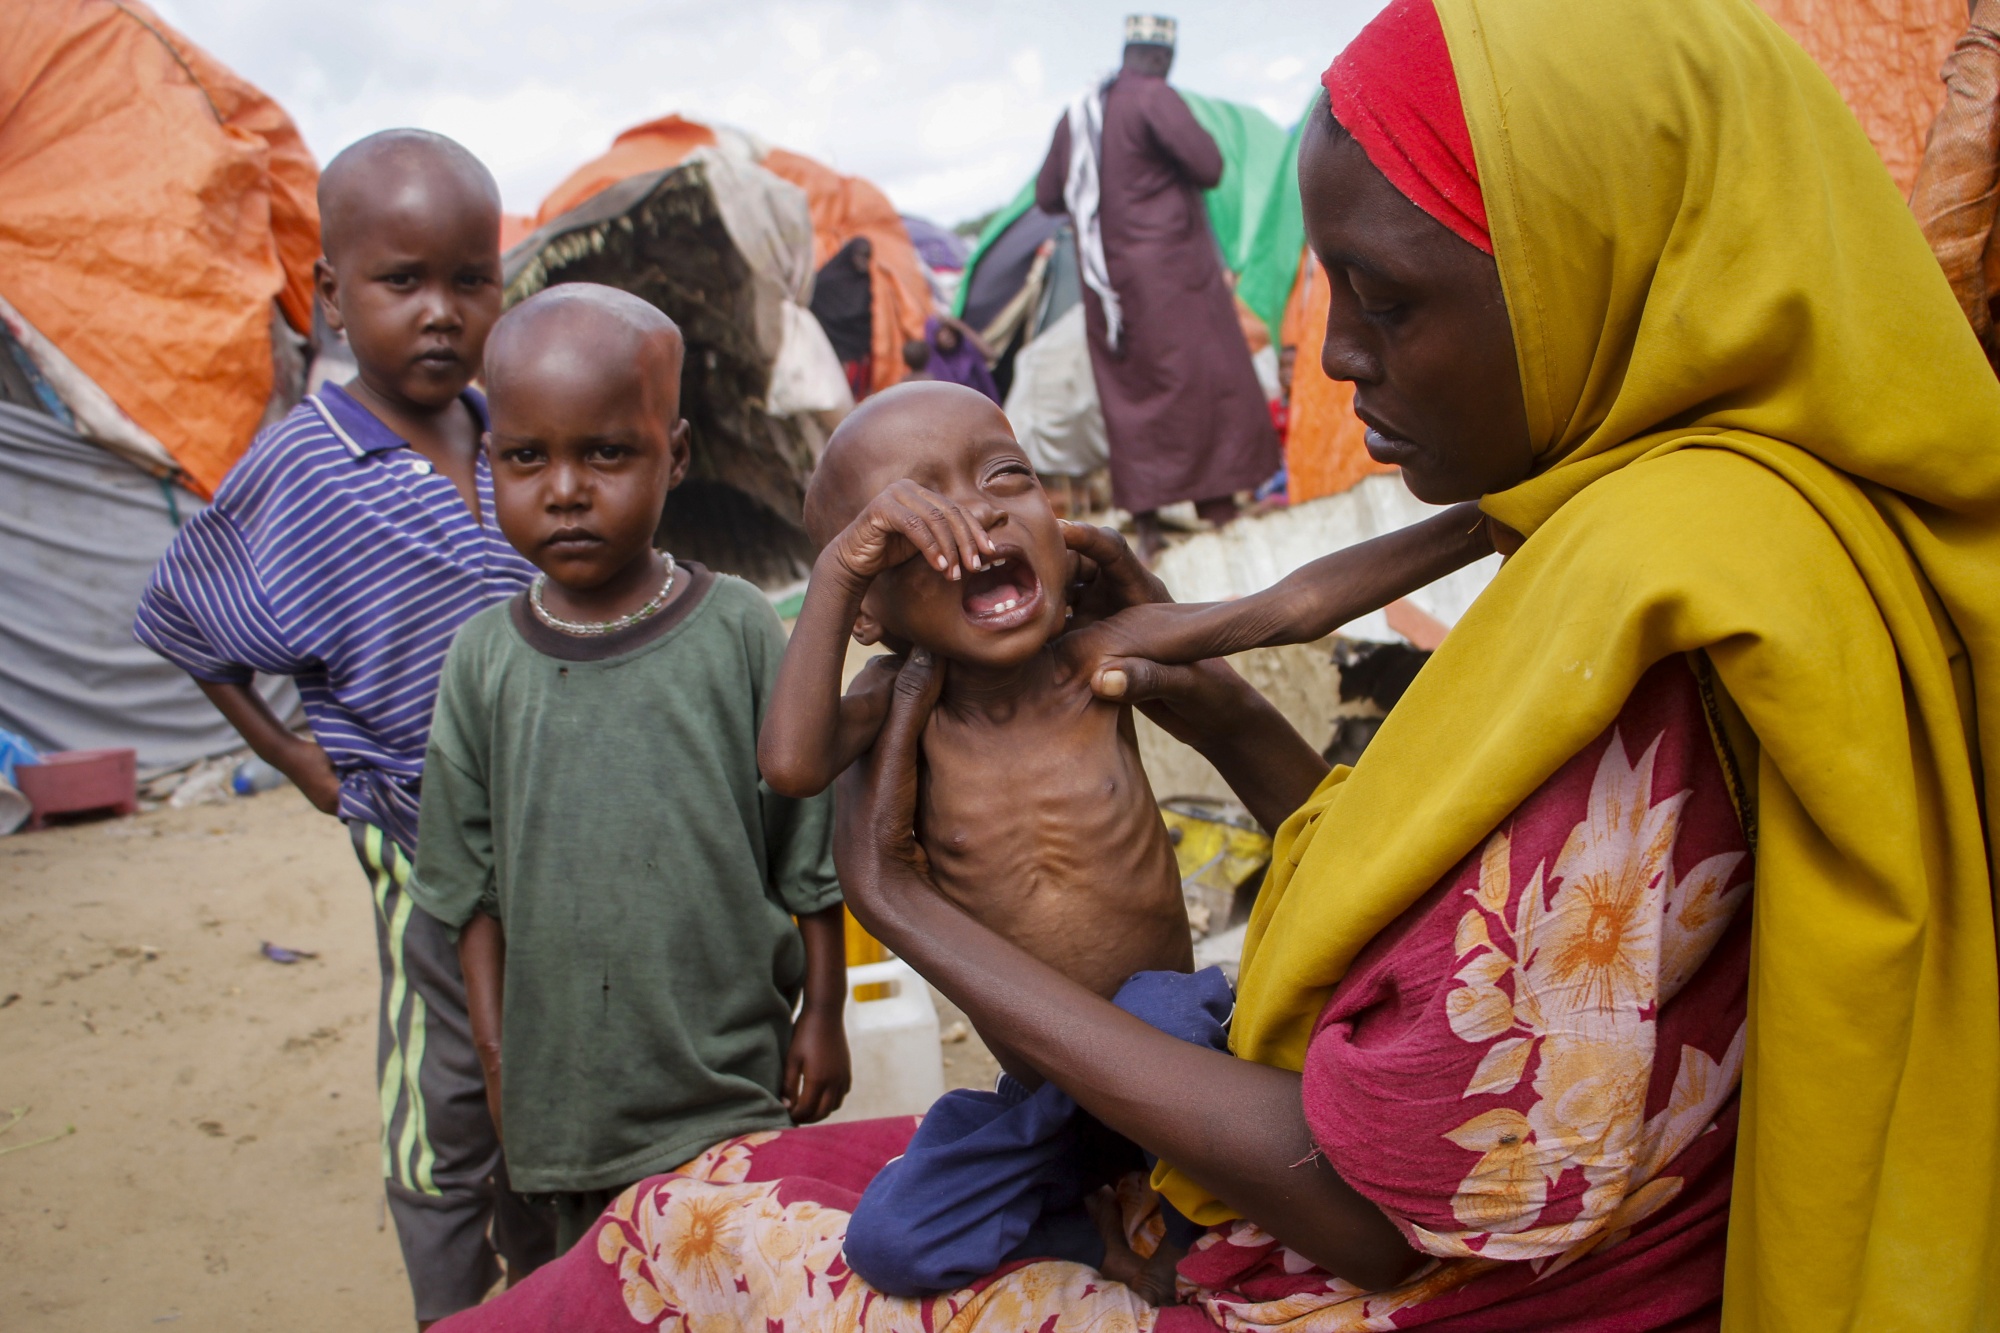 Maryan Madey, who fled the drought-stricken Lower Shabelle region, holds her malnourished daughter Deka Ali, 1, at a camp for the displaced on the outskirts of Mogadishu, Somalia Saturday, Sept. 3, 2022. Millions of people in the Horn of Africa region are going hungry because of drought, and thousands have died, with Somalia especially hard hit because it sourced at least 90 percent of its grain from Ukraine and Russia before Russia invaded Ukraine. (AP Photo/Farah Abdi Warsameh)